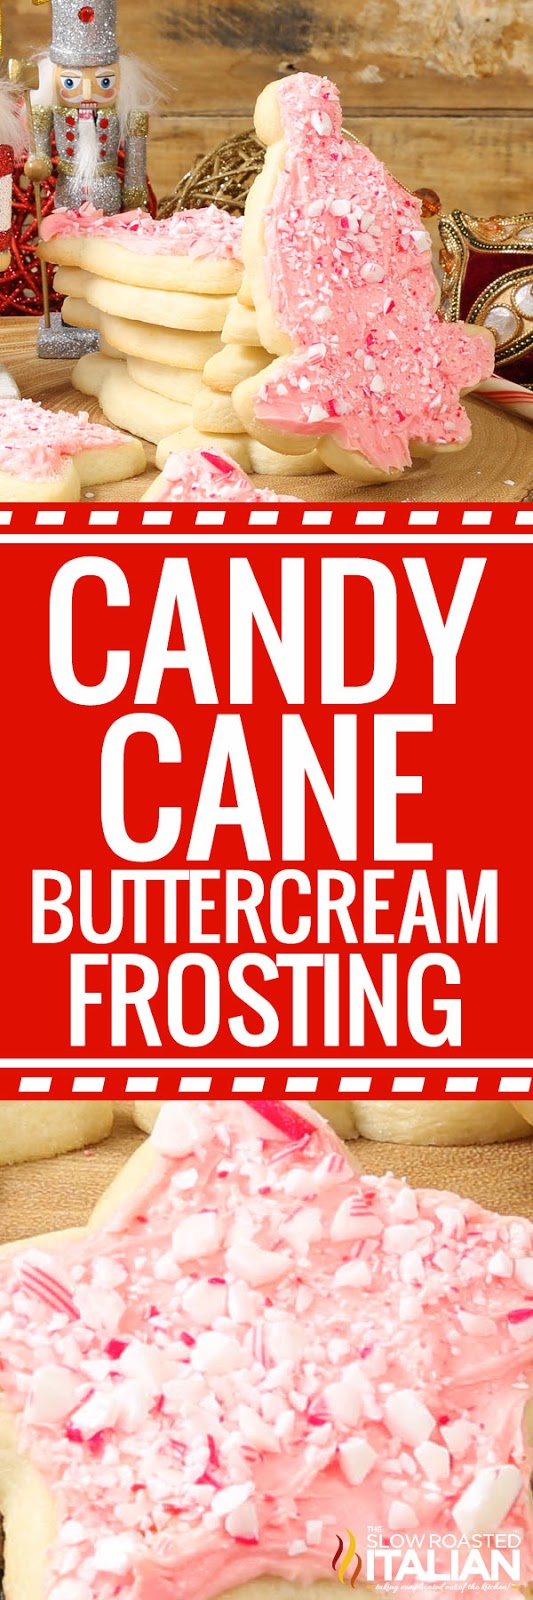 Candy Cane Buttercream Frosting